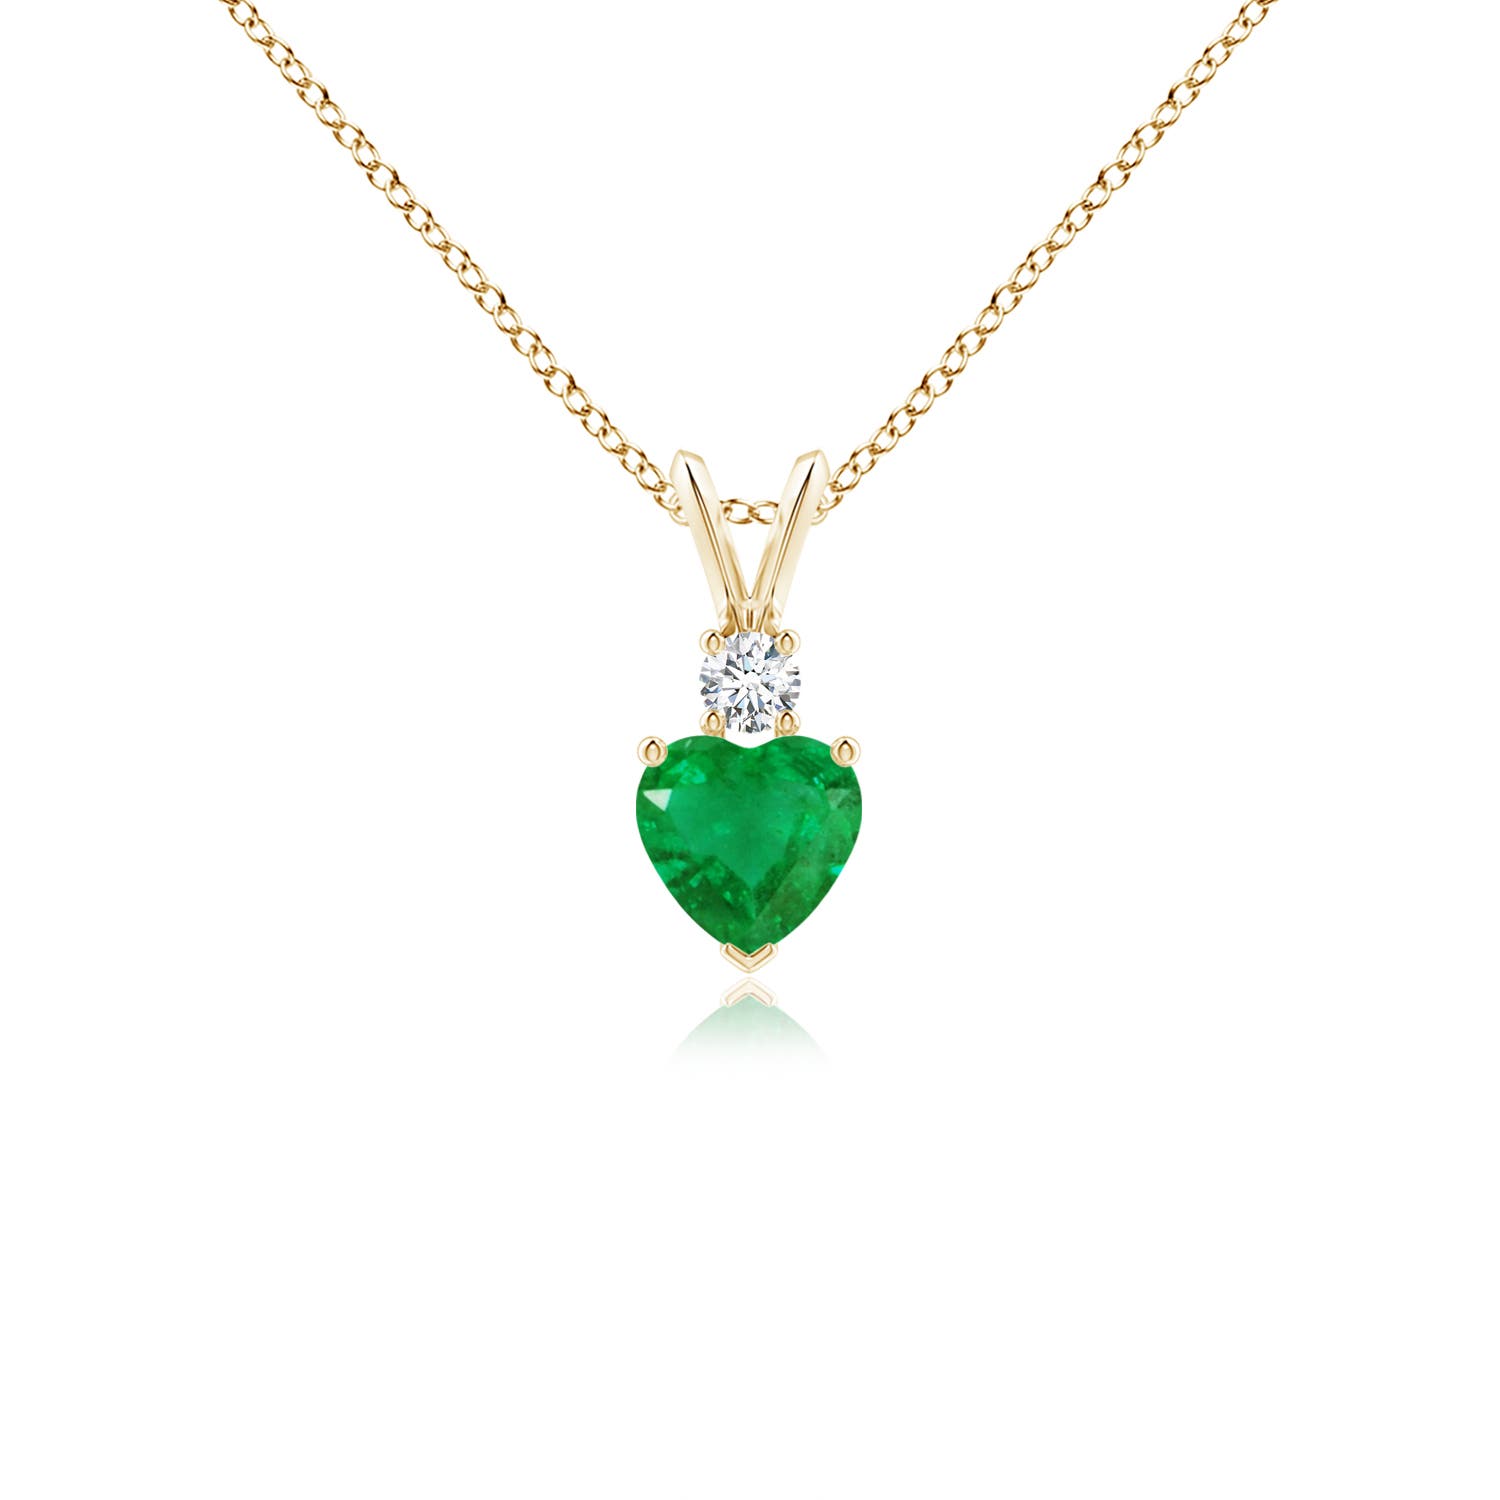 AA - Emerald / 0.44 CT / 14 KT Yellow Gold